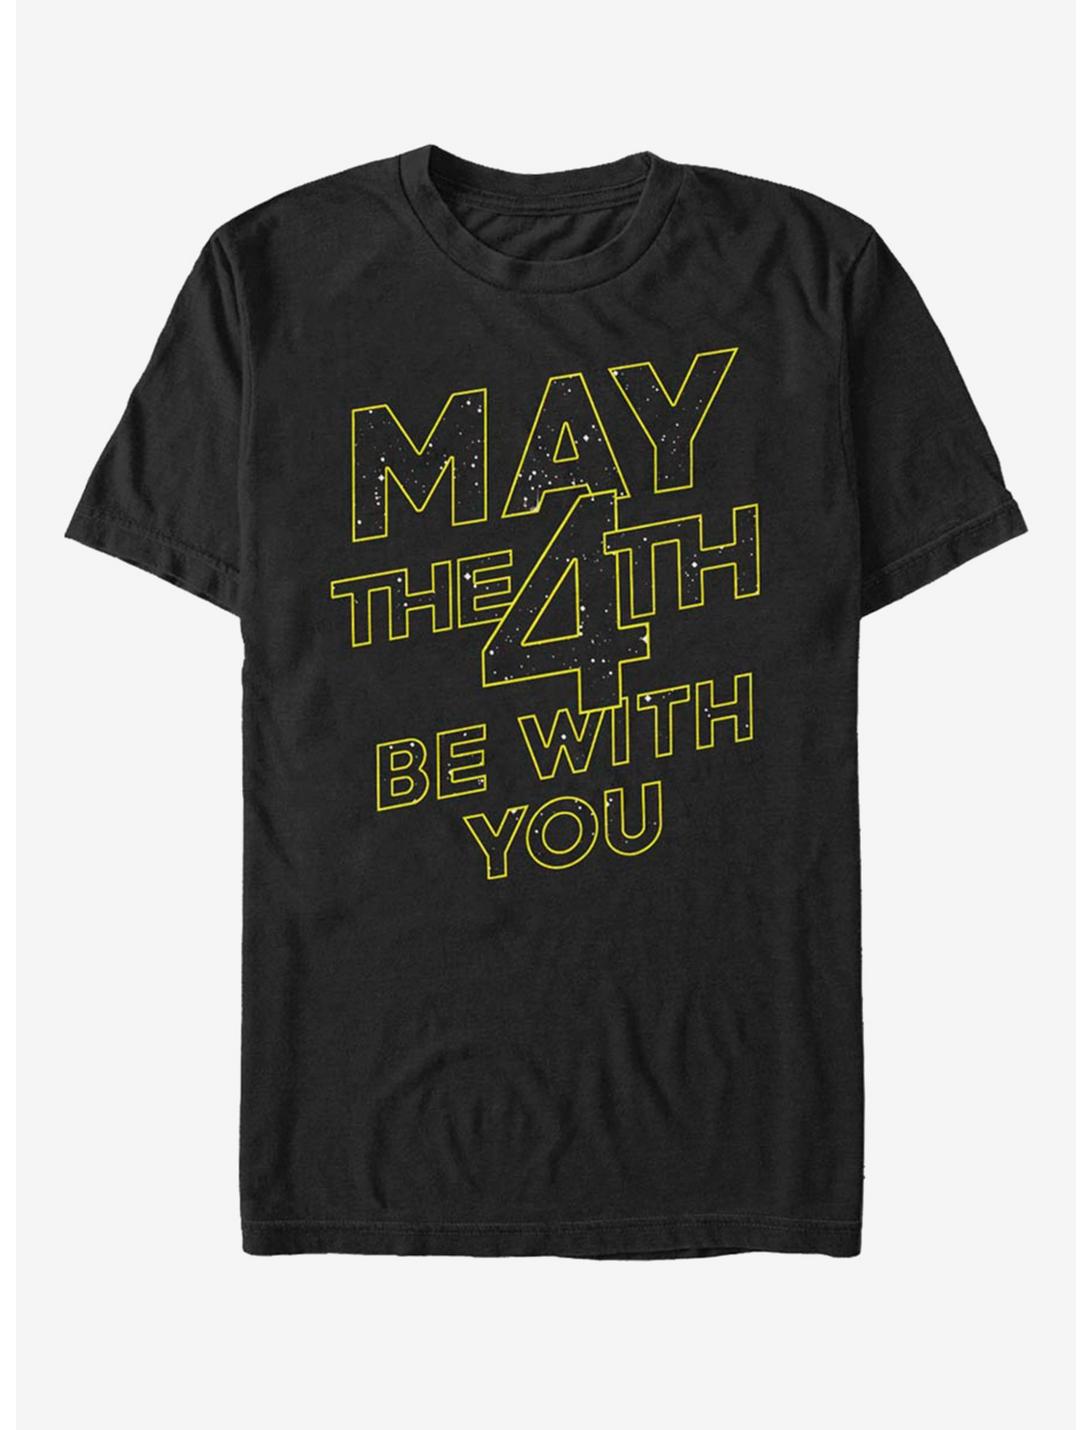 Star Wars May The Fourth Be With You Classic T-Shirt, BLACK, hi-res